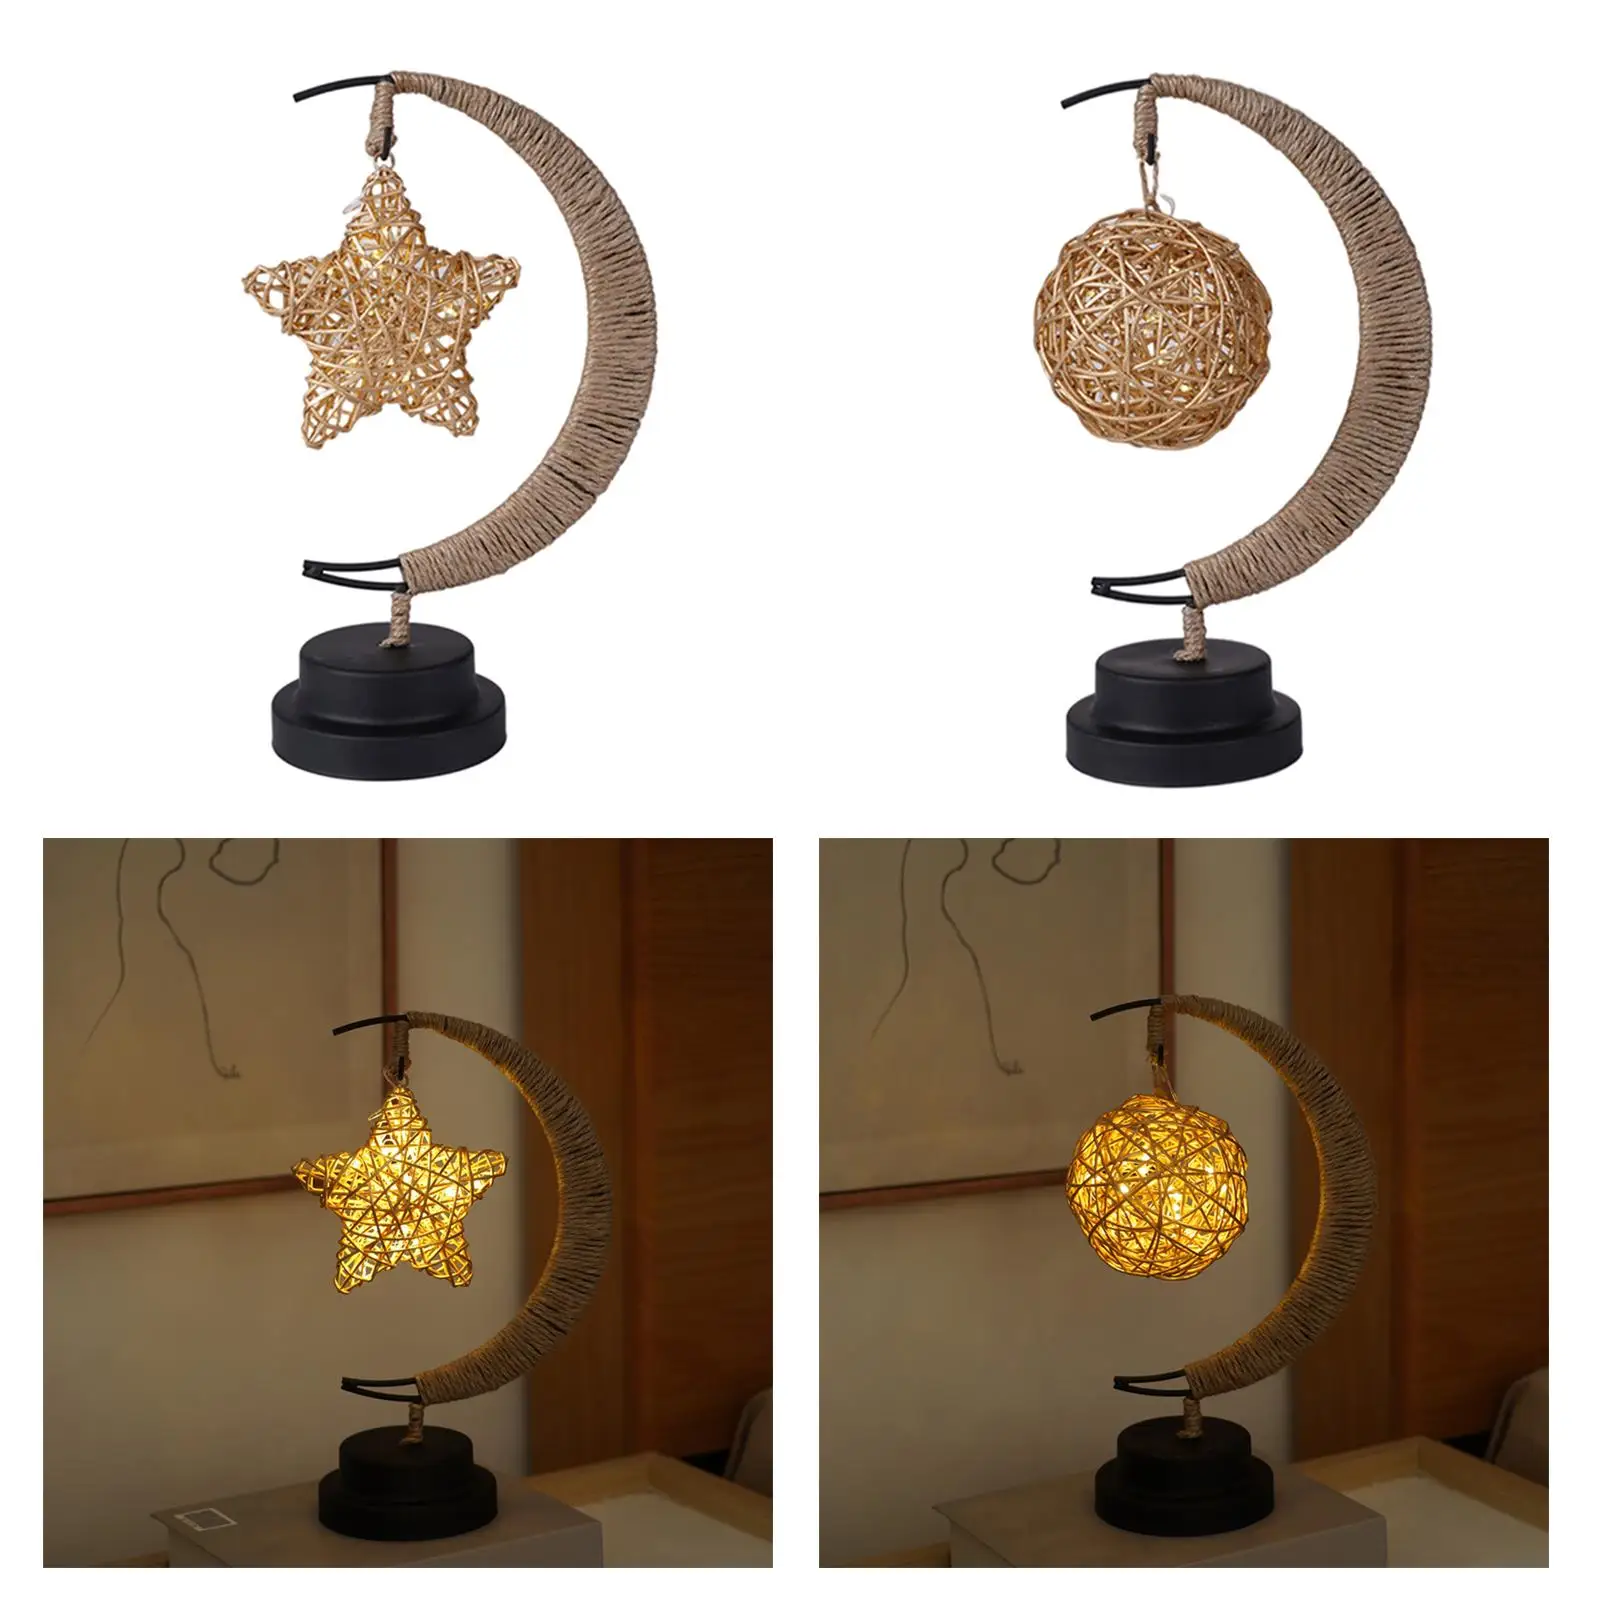 Five-pointed Star Wishing Ball Moon LED Night Lights Bedroom Living Room Bedside Table Lamp Gifts For Party Wedding Decoration